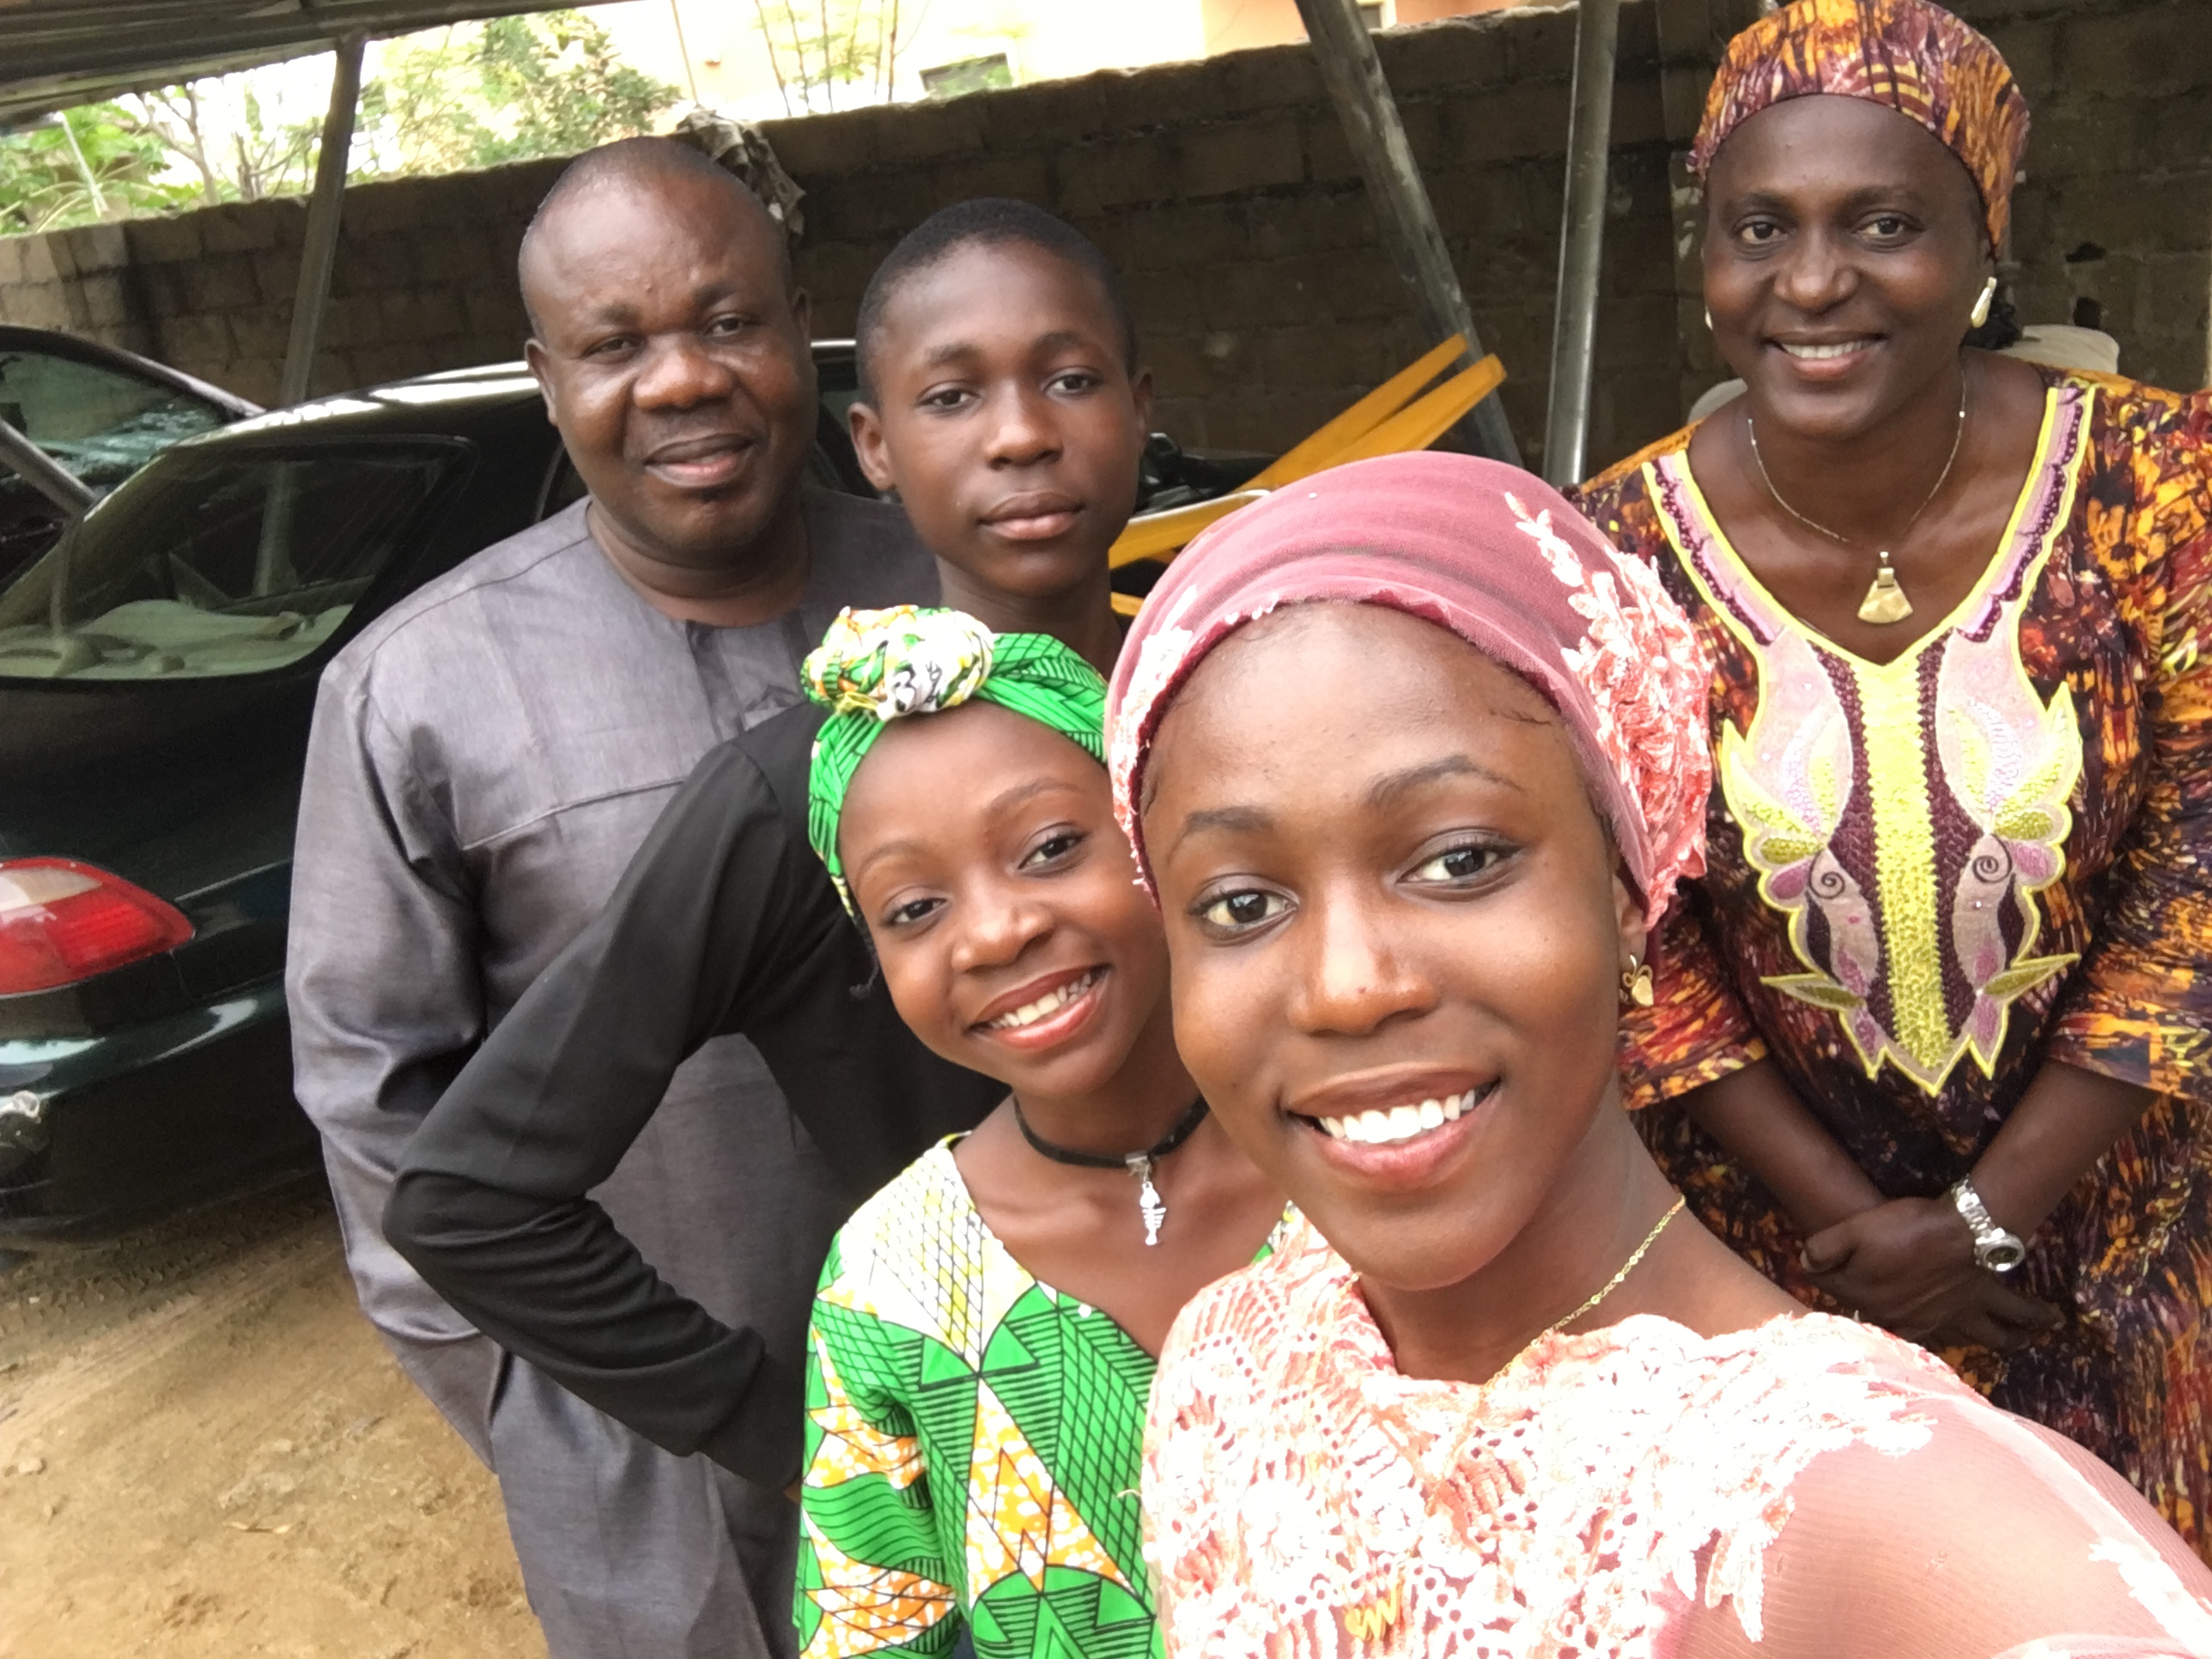 Beulah Yusuf, front right, takes a selfie with her family